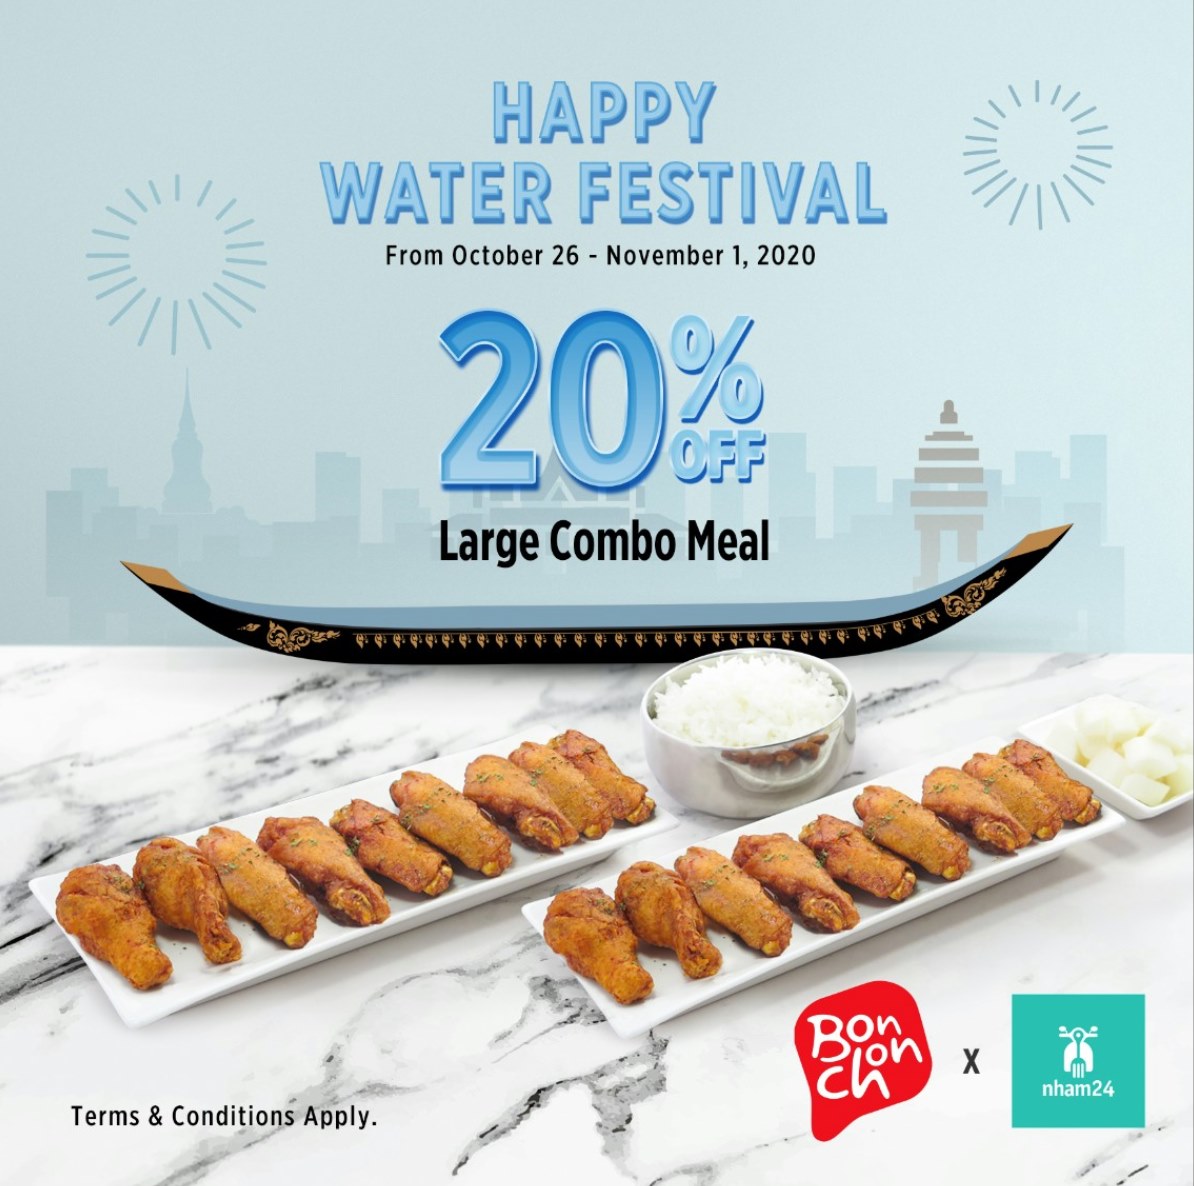 Happy Water Festival 20% Off Large Combo Meal